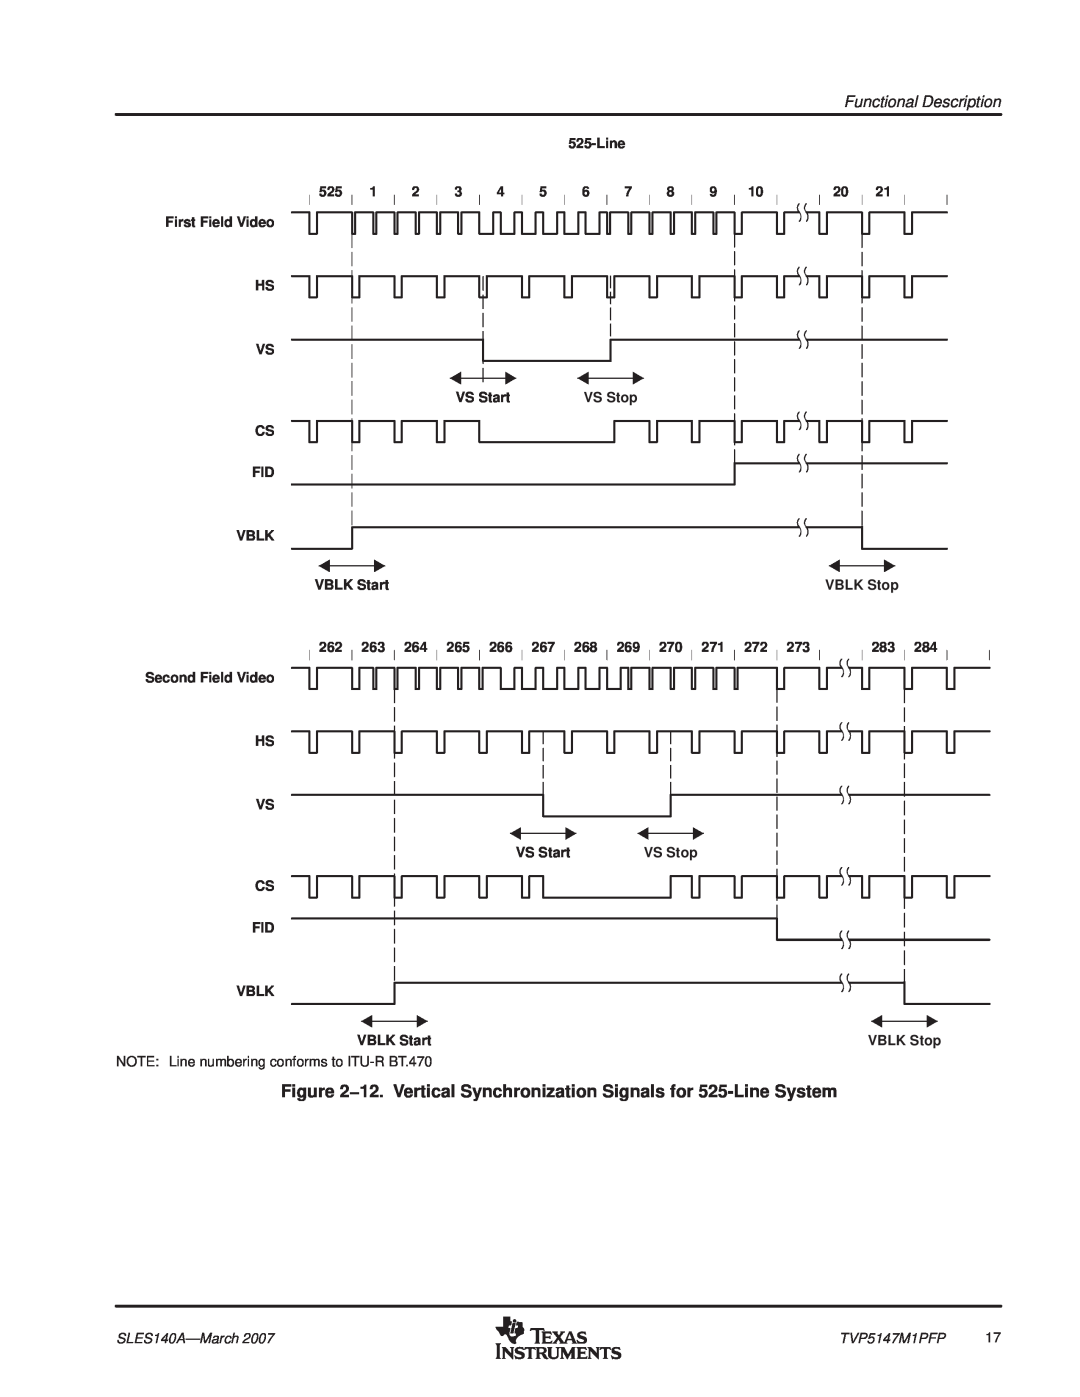 Texas Instruments TVP5147M1PFP manual 12. Vertical Synchronization Signals for 525-Line System 